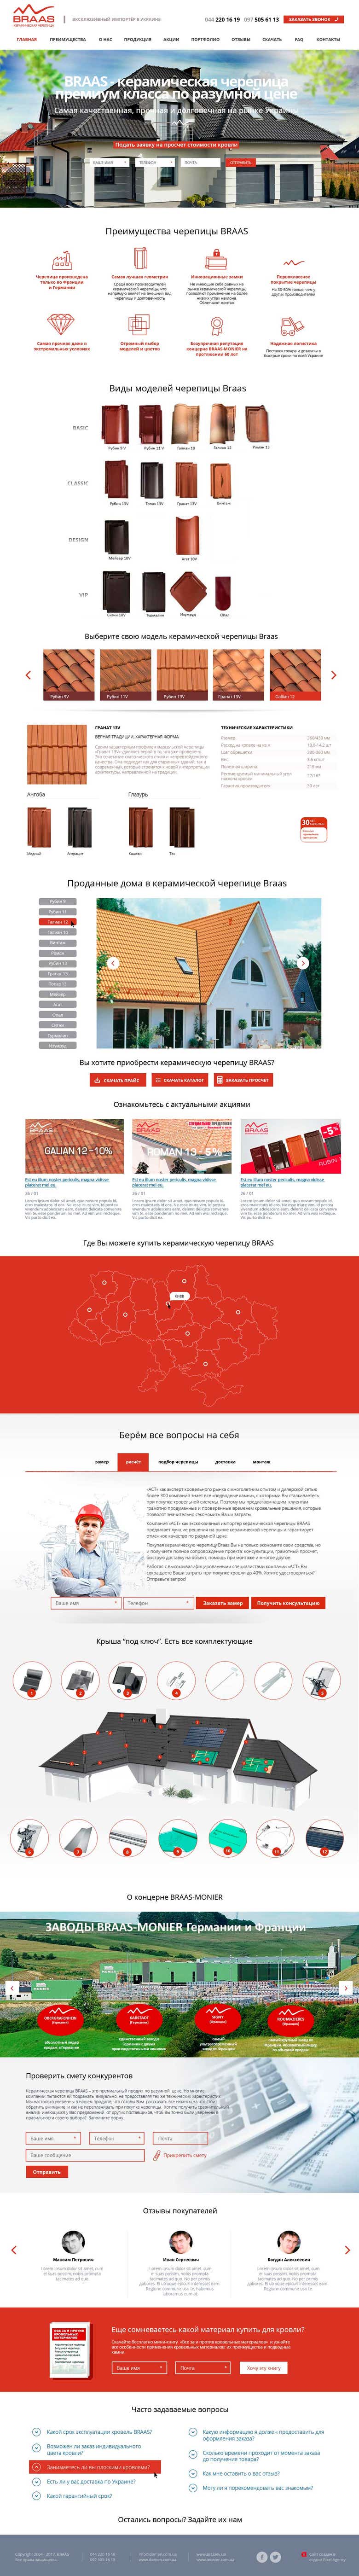 Landing page for company importer of roof tile Braas